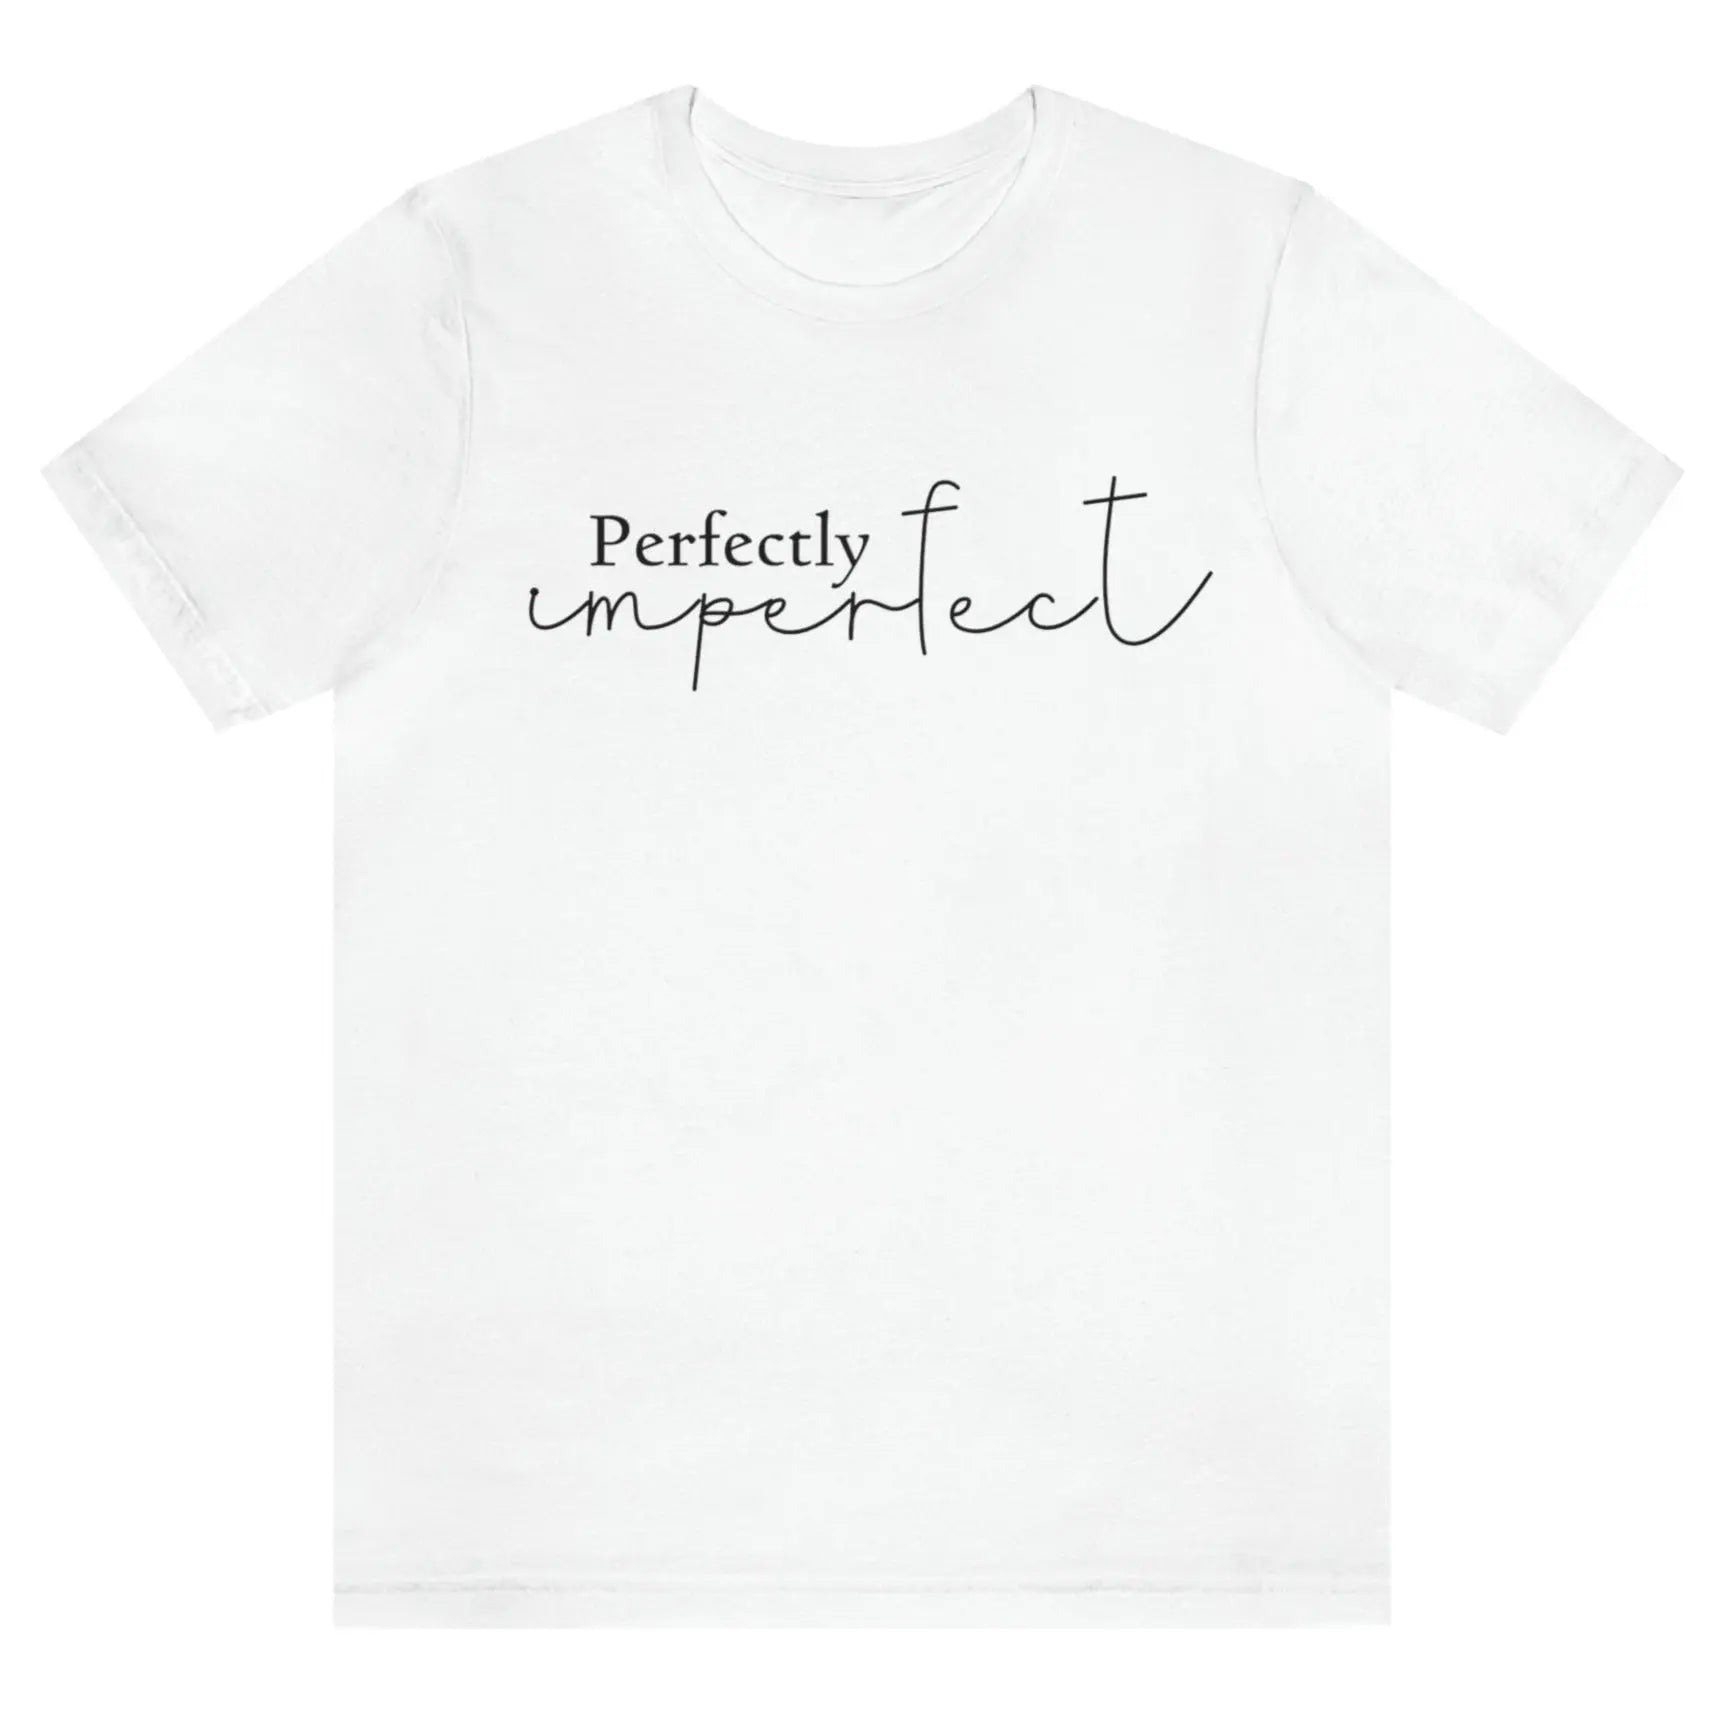 perfectly-imperfect-white-t-shirt-womens